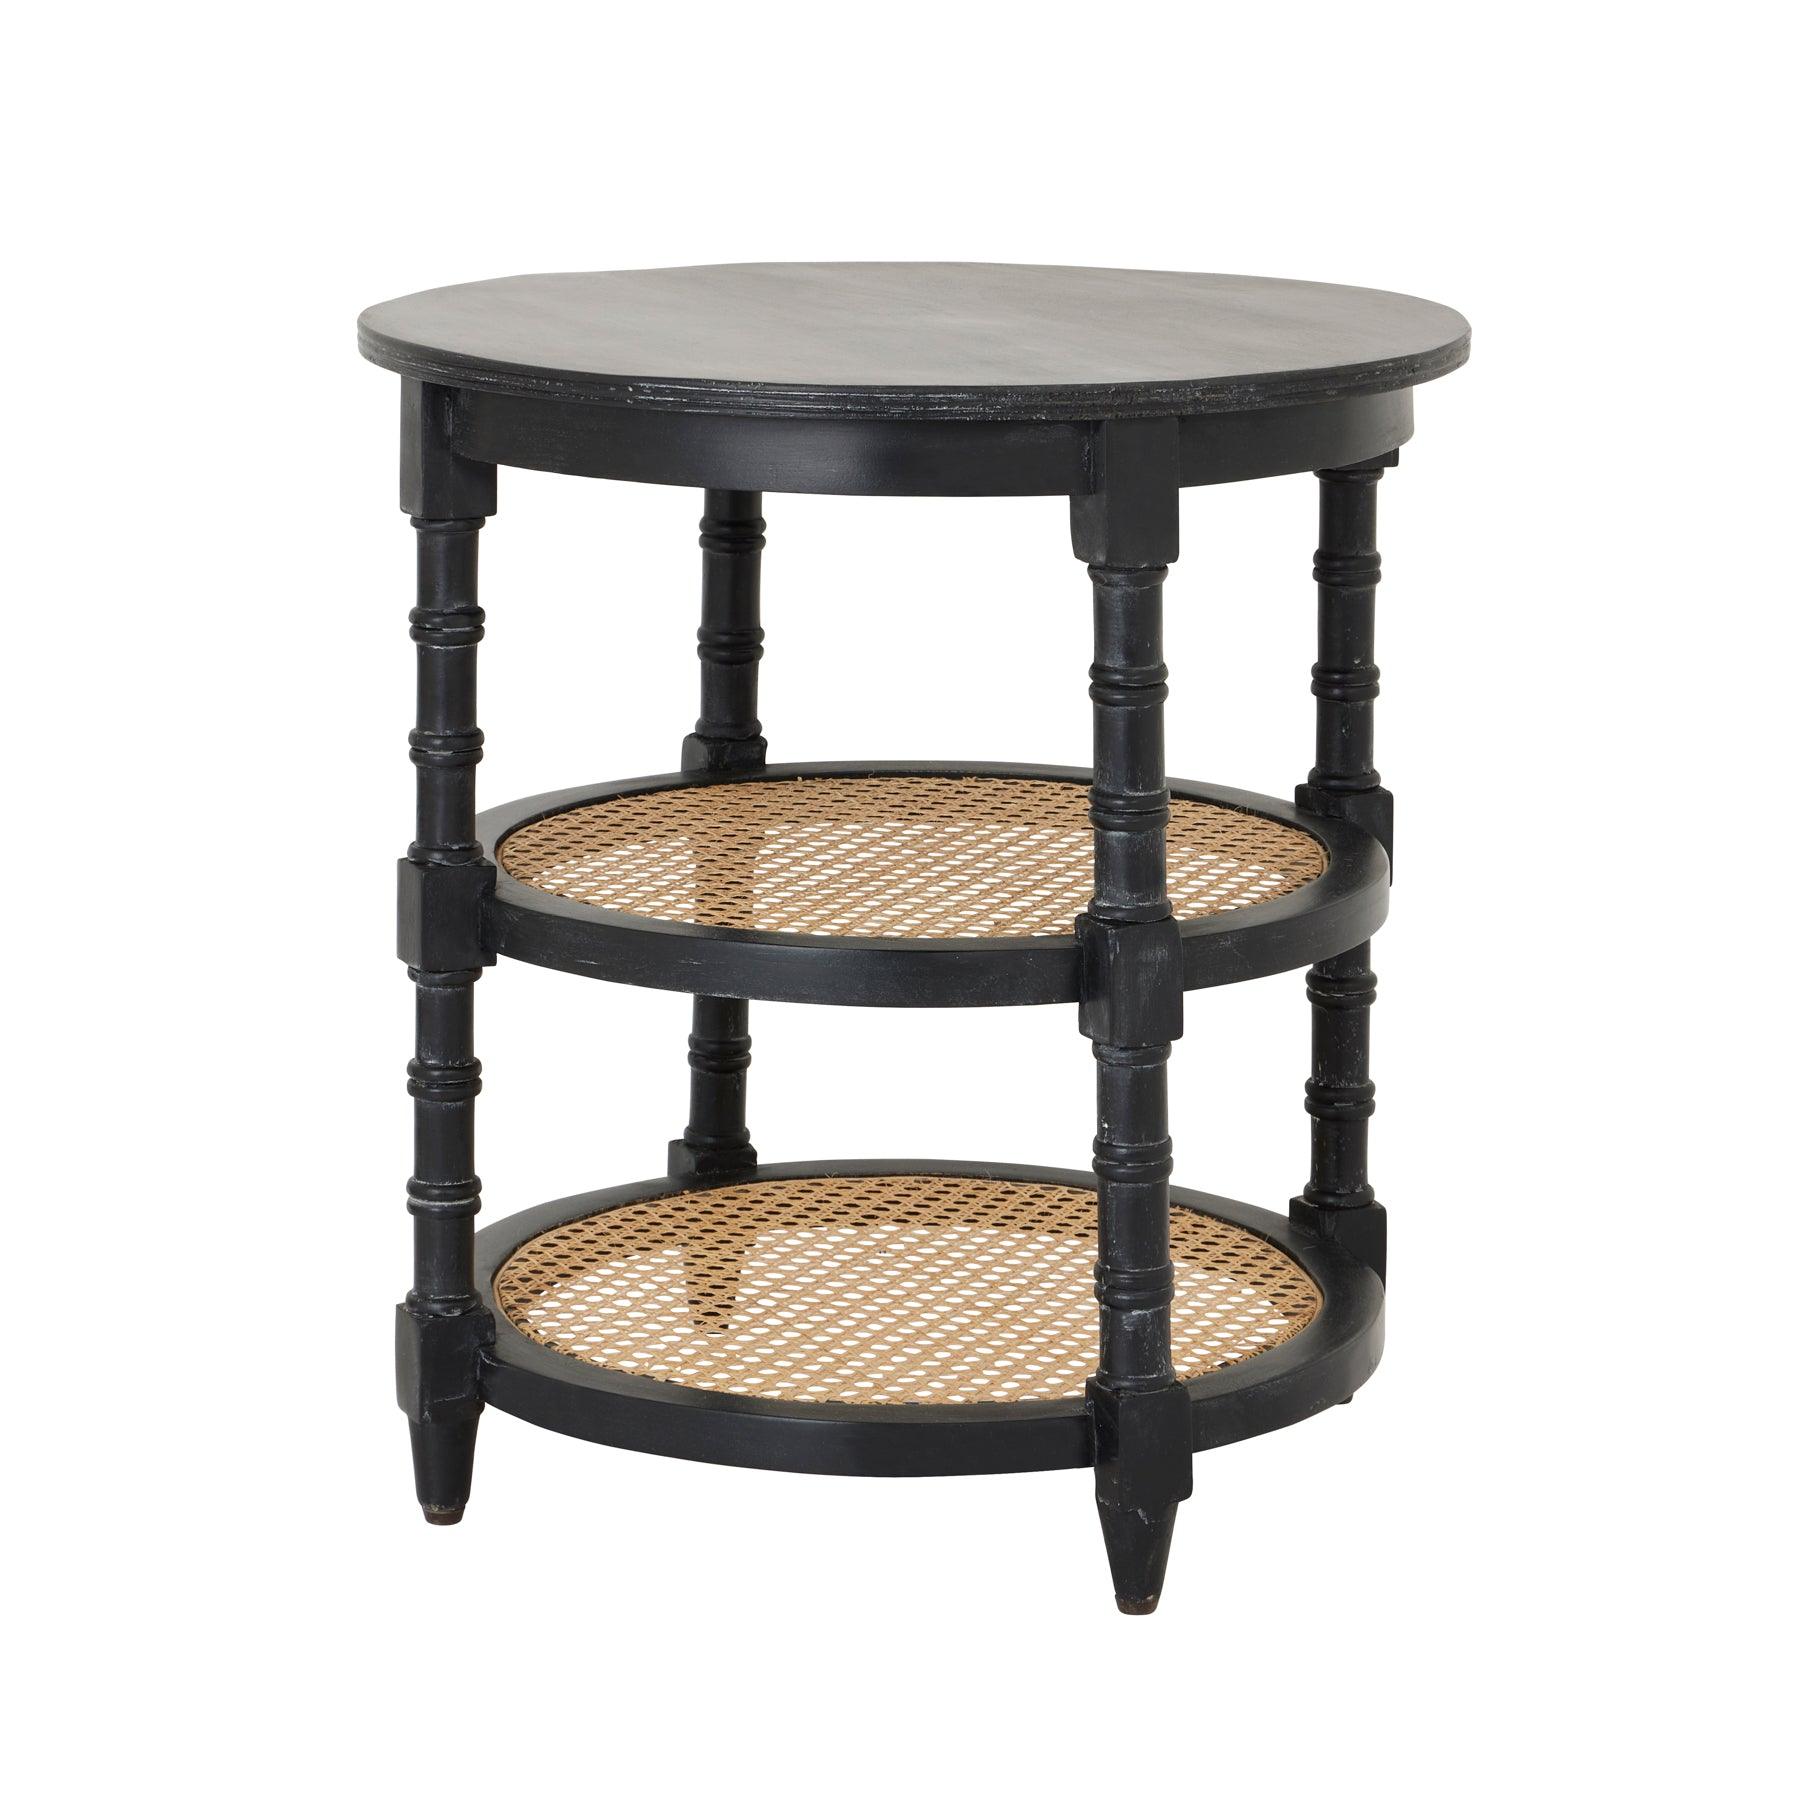 View Raffles Black Round Side Table information